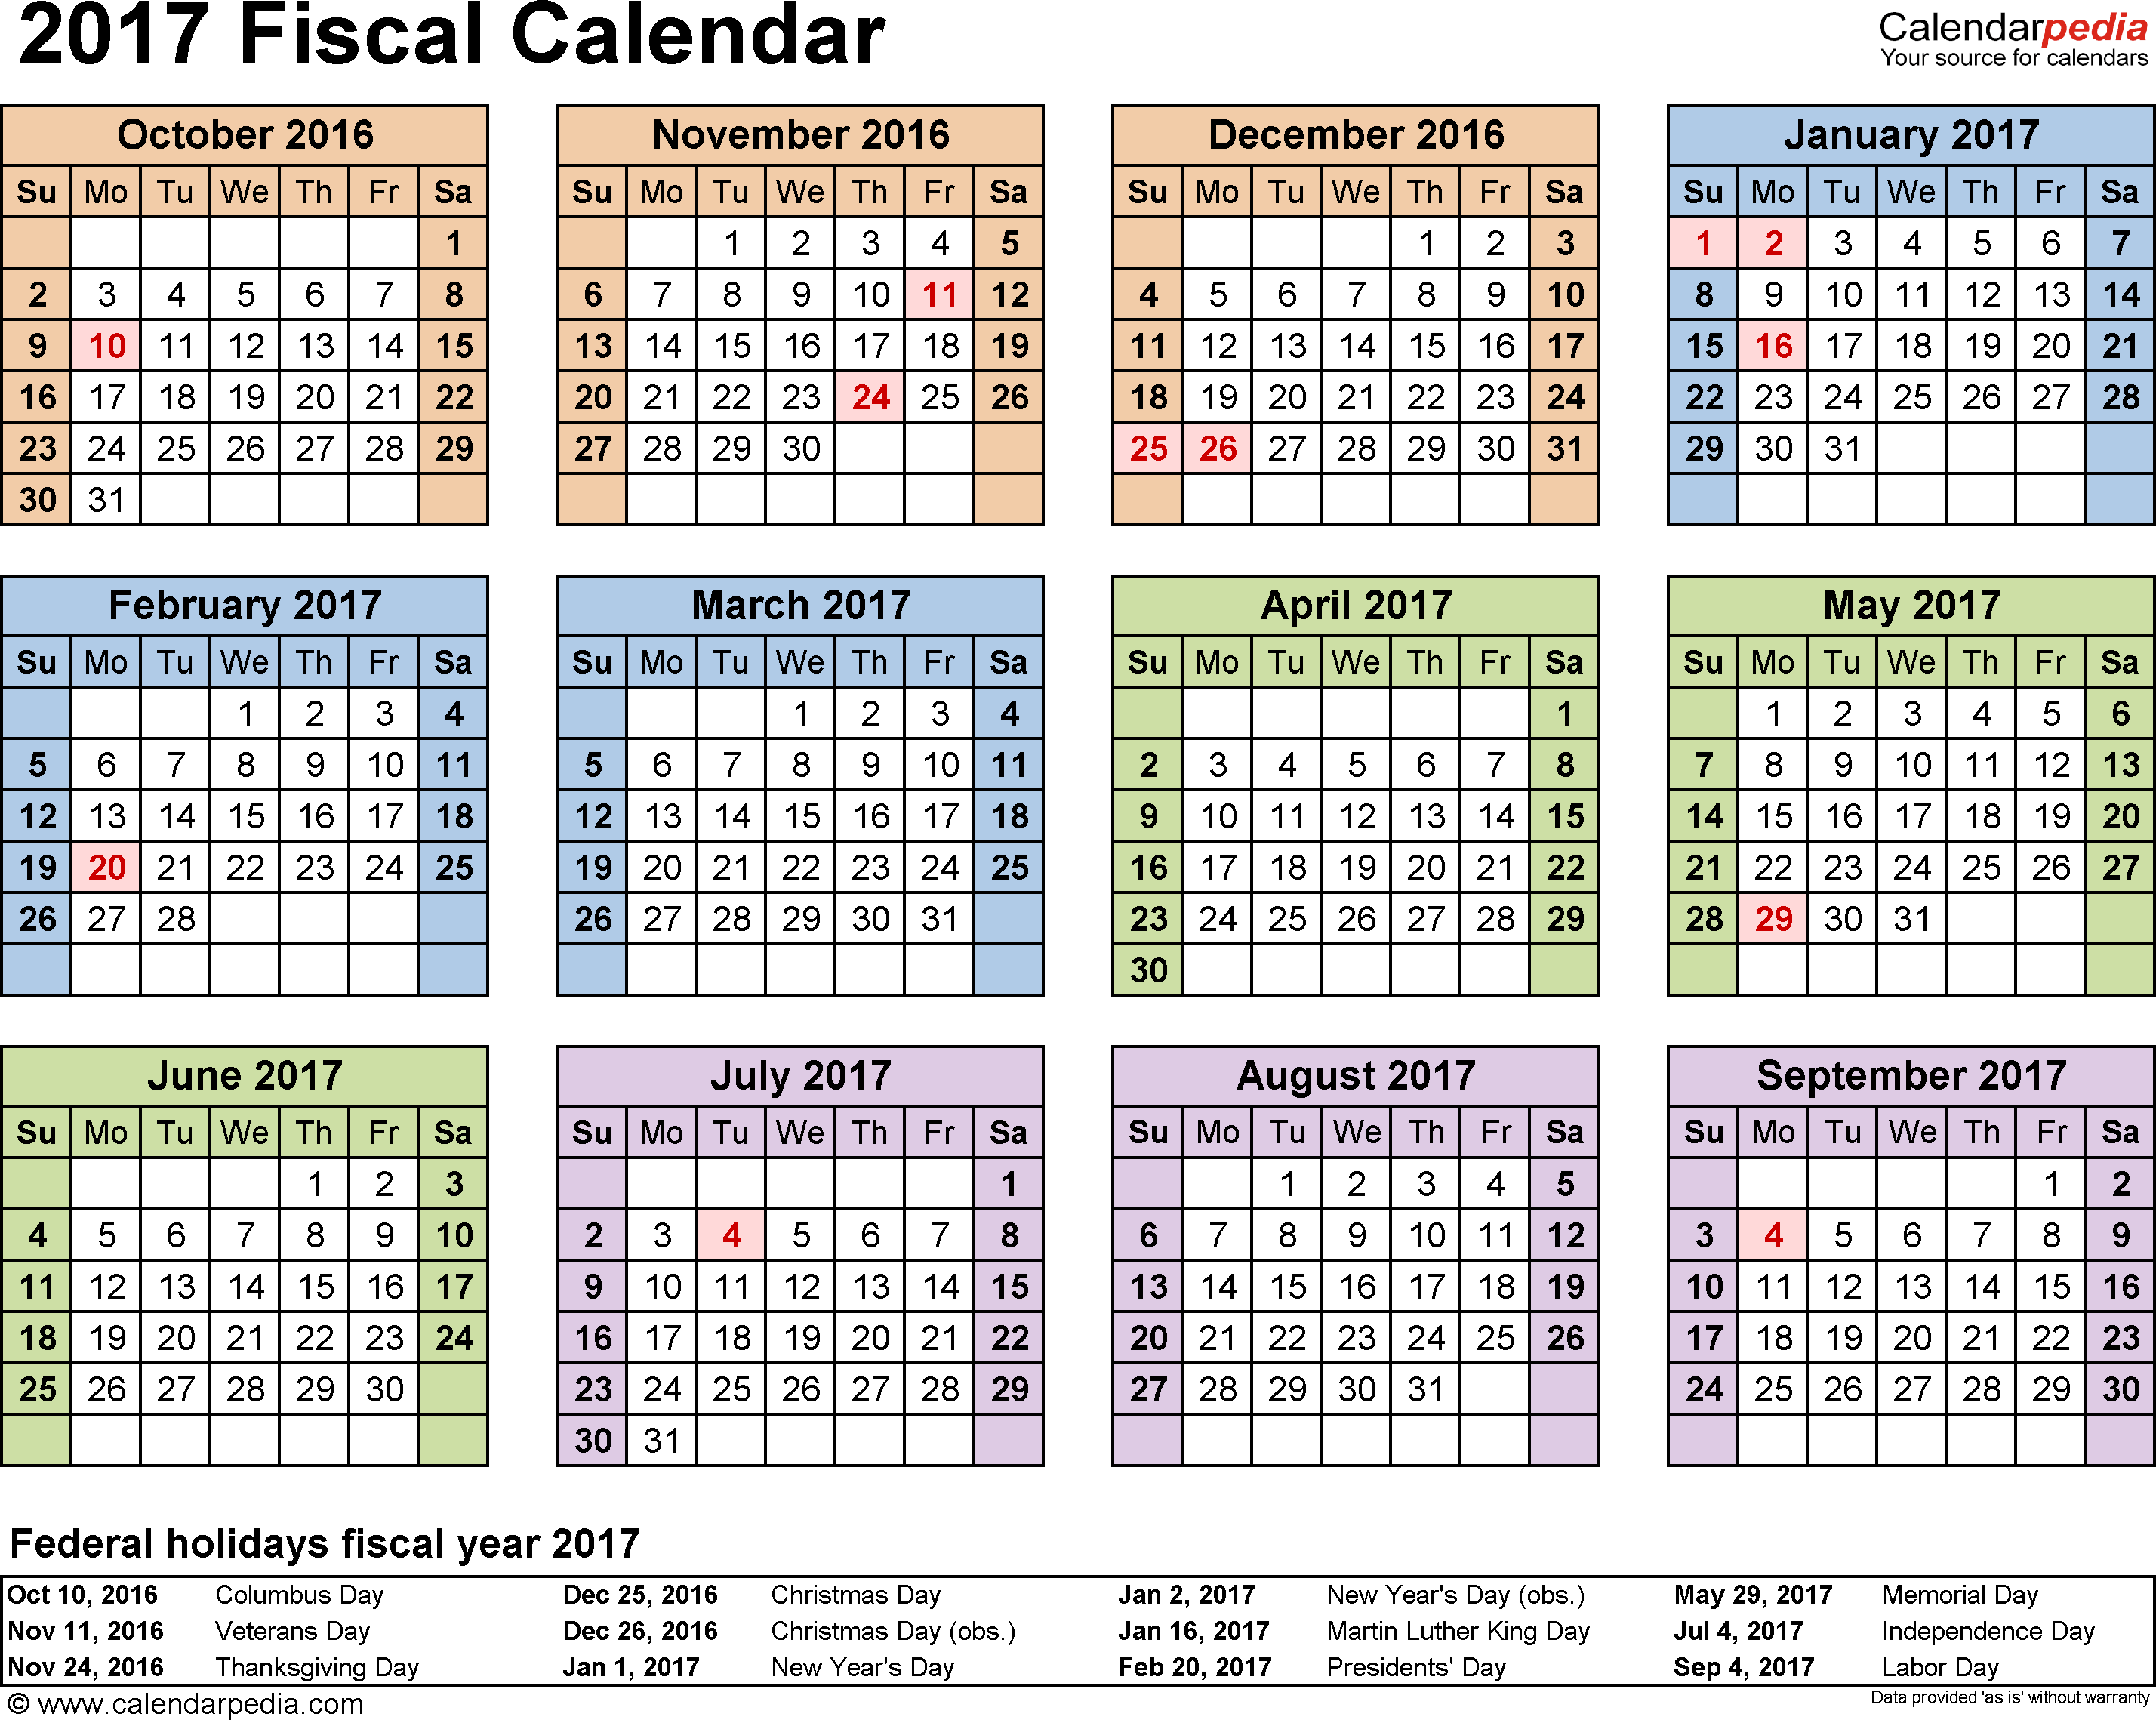 Fiscal calendars 2017 as free printable Excel templates